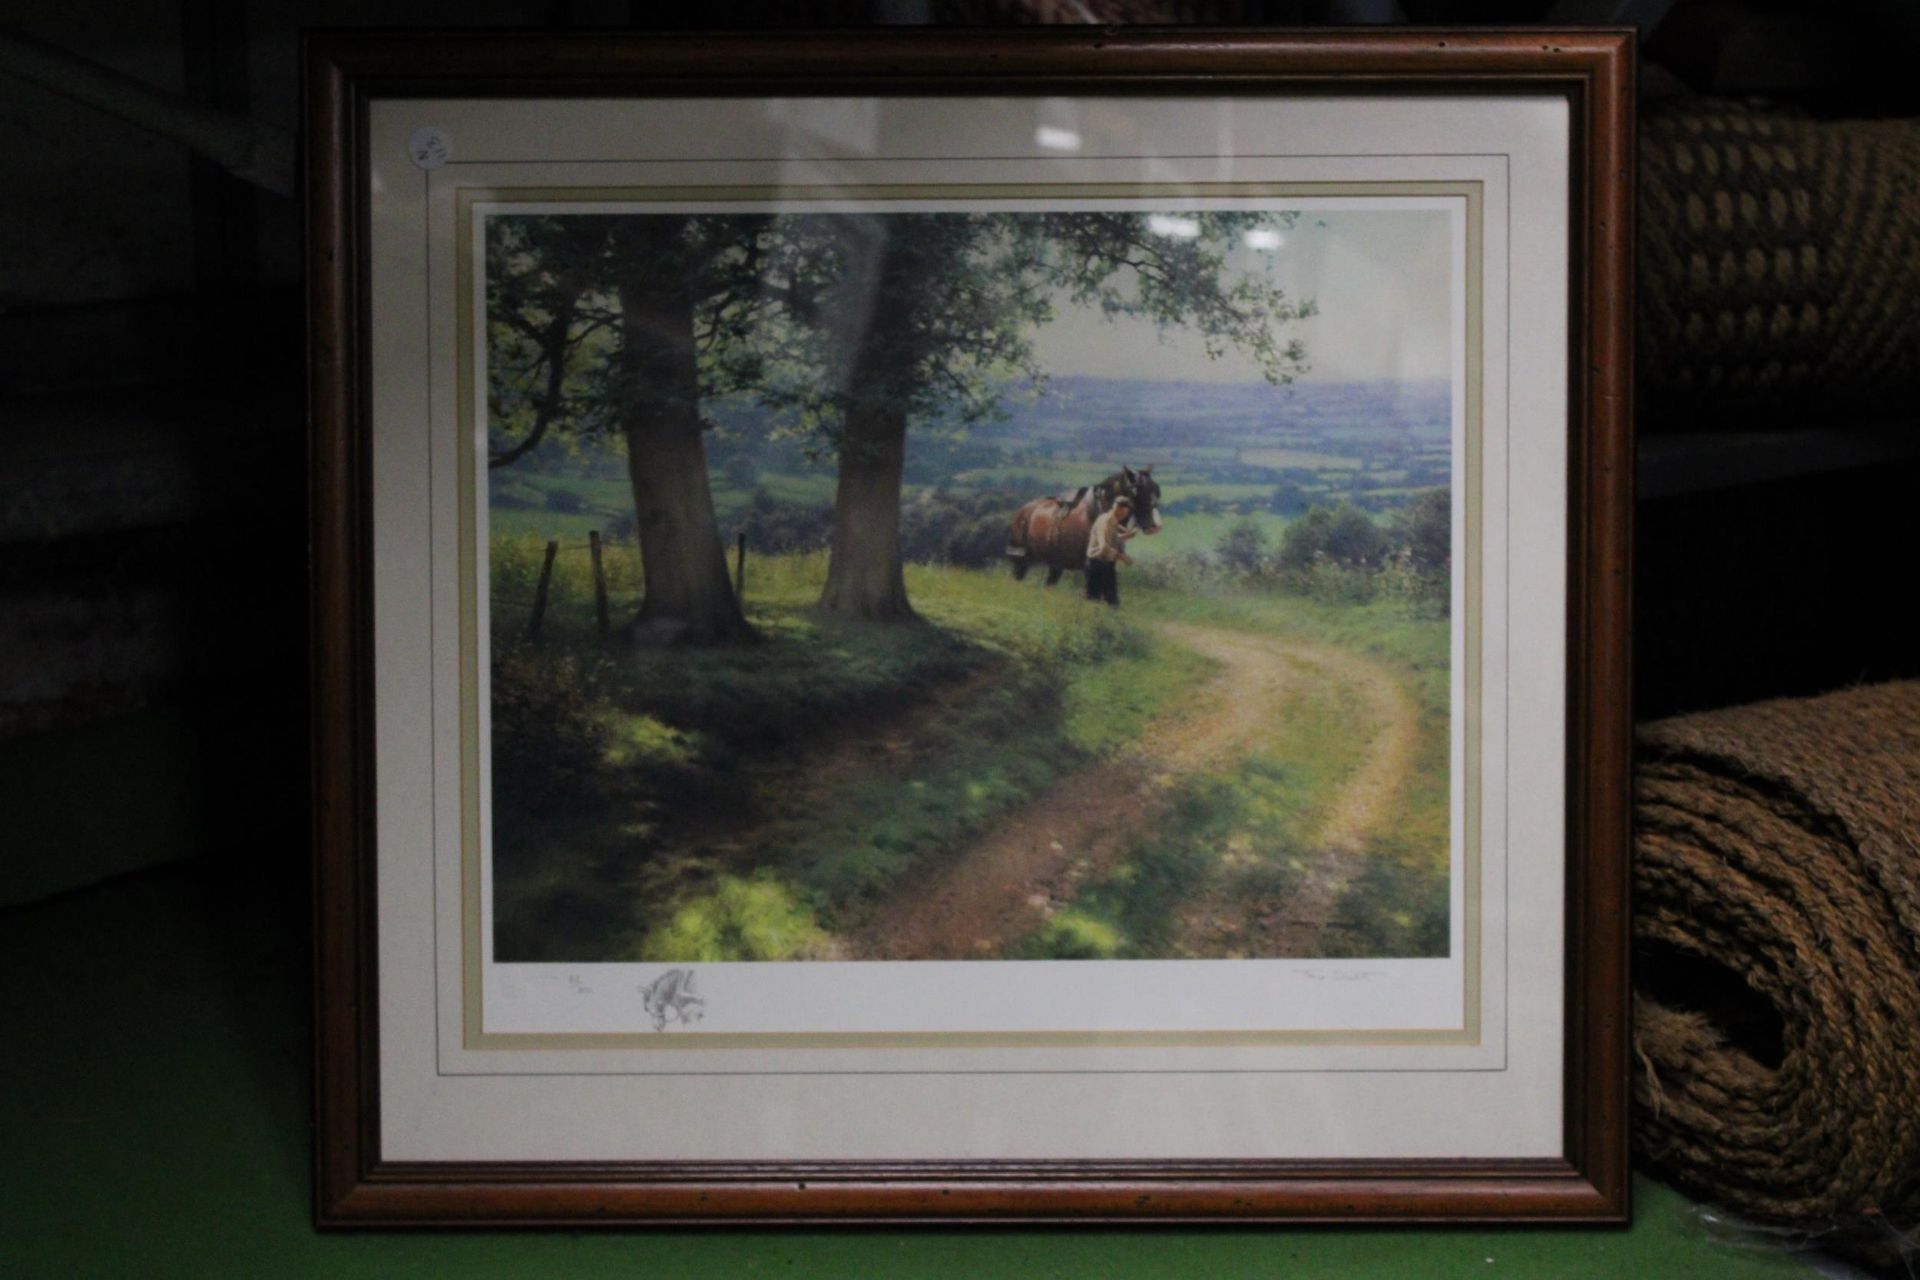 TWO LIMITED EDITION FRAMED PRINTS OF HEAVY HORSES AT WORK, SIGNED TONY SHEATH - Image 4 of 6